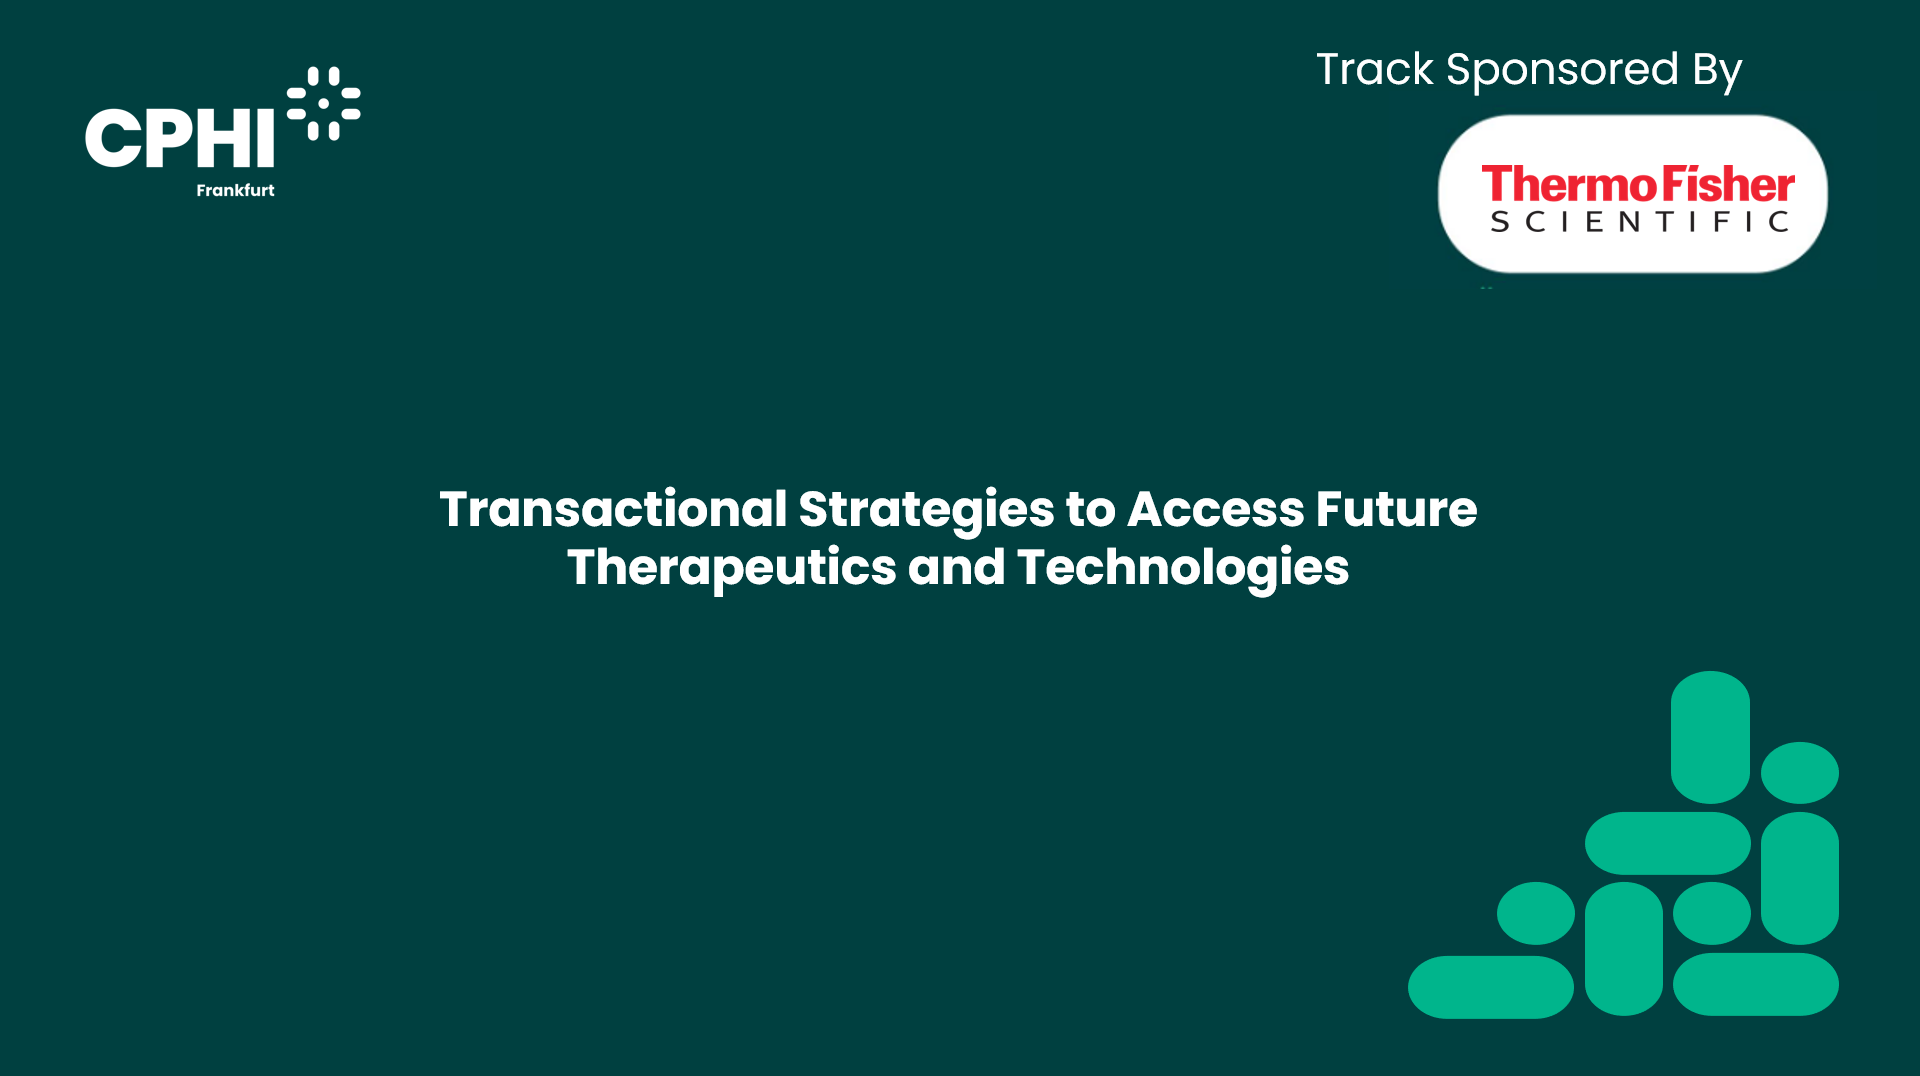 Transactional Strategies to Access Future Therapeutics and Technologies